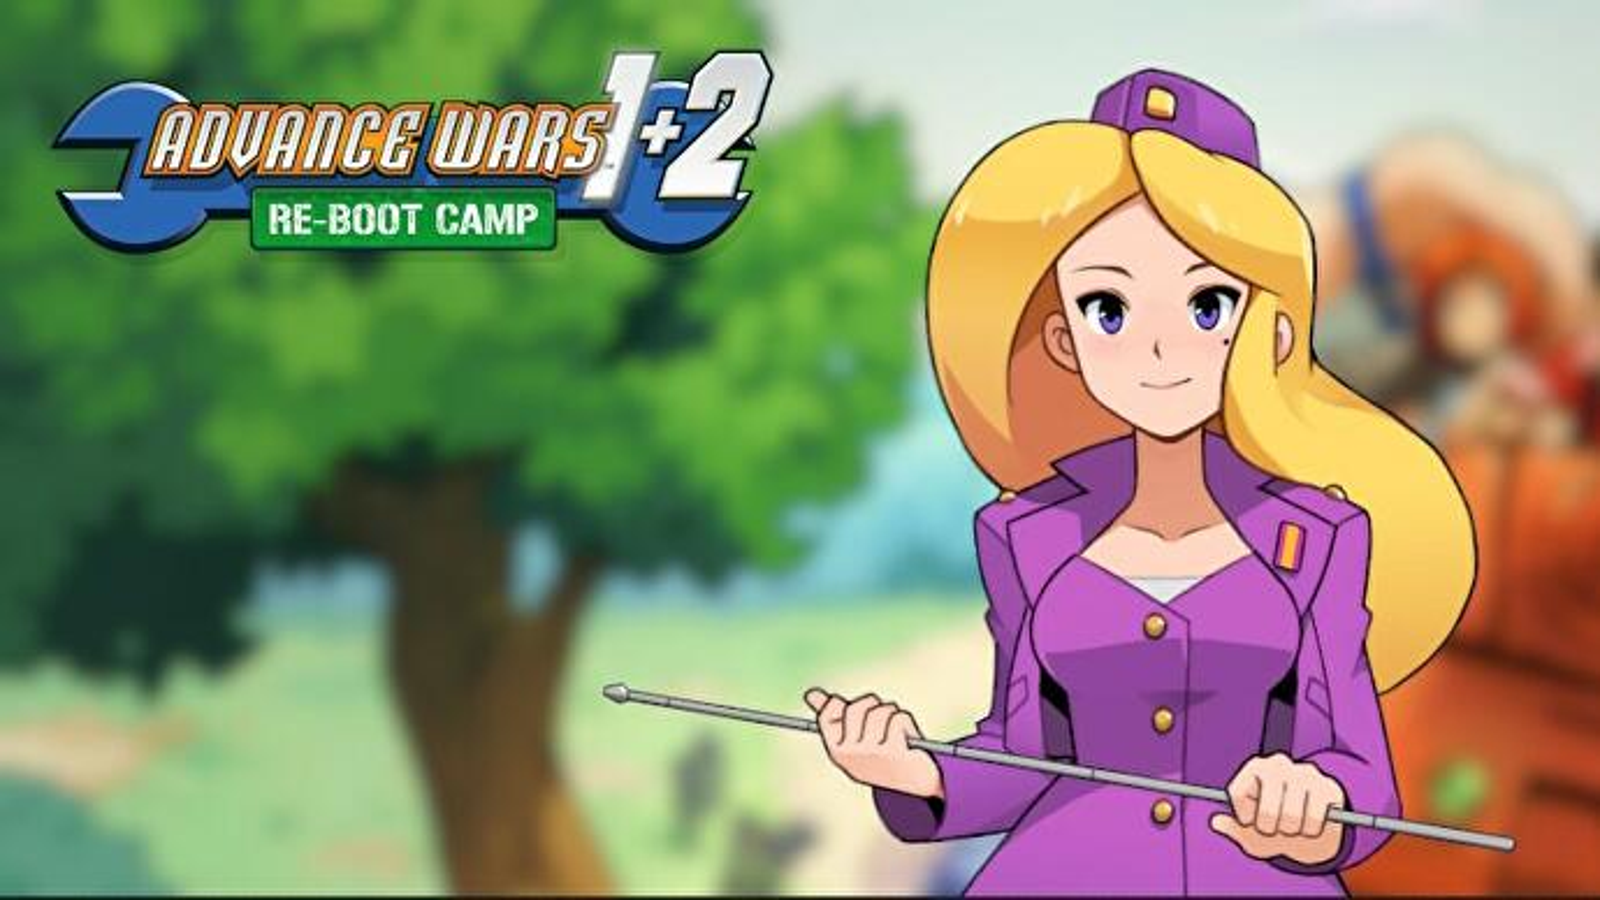 Nintendo has finally given Advance Wars 1+2 a new release date